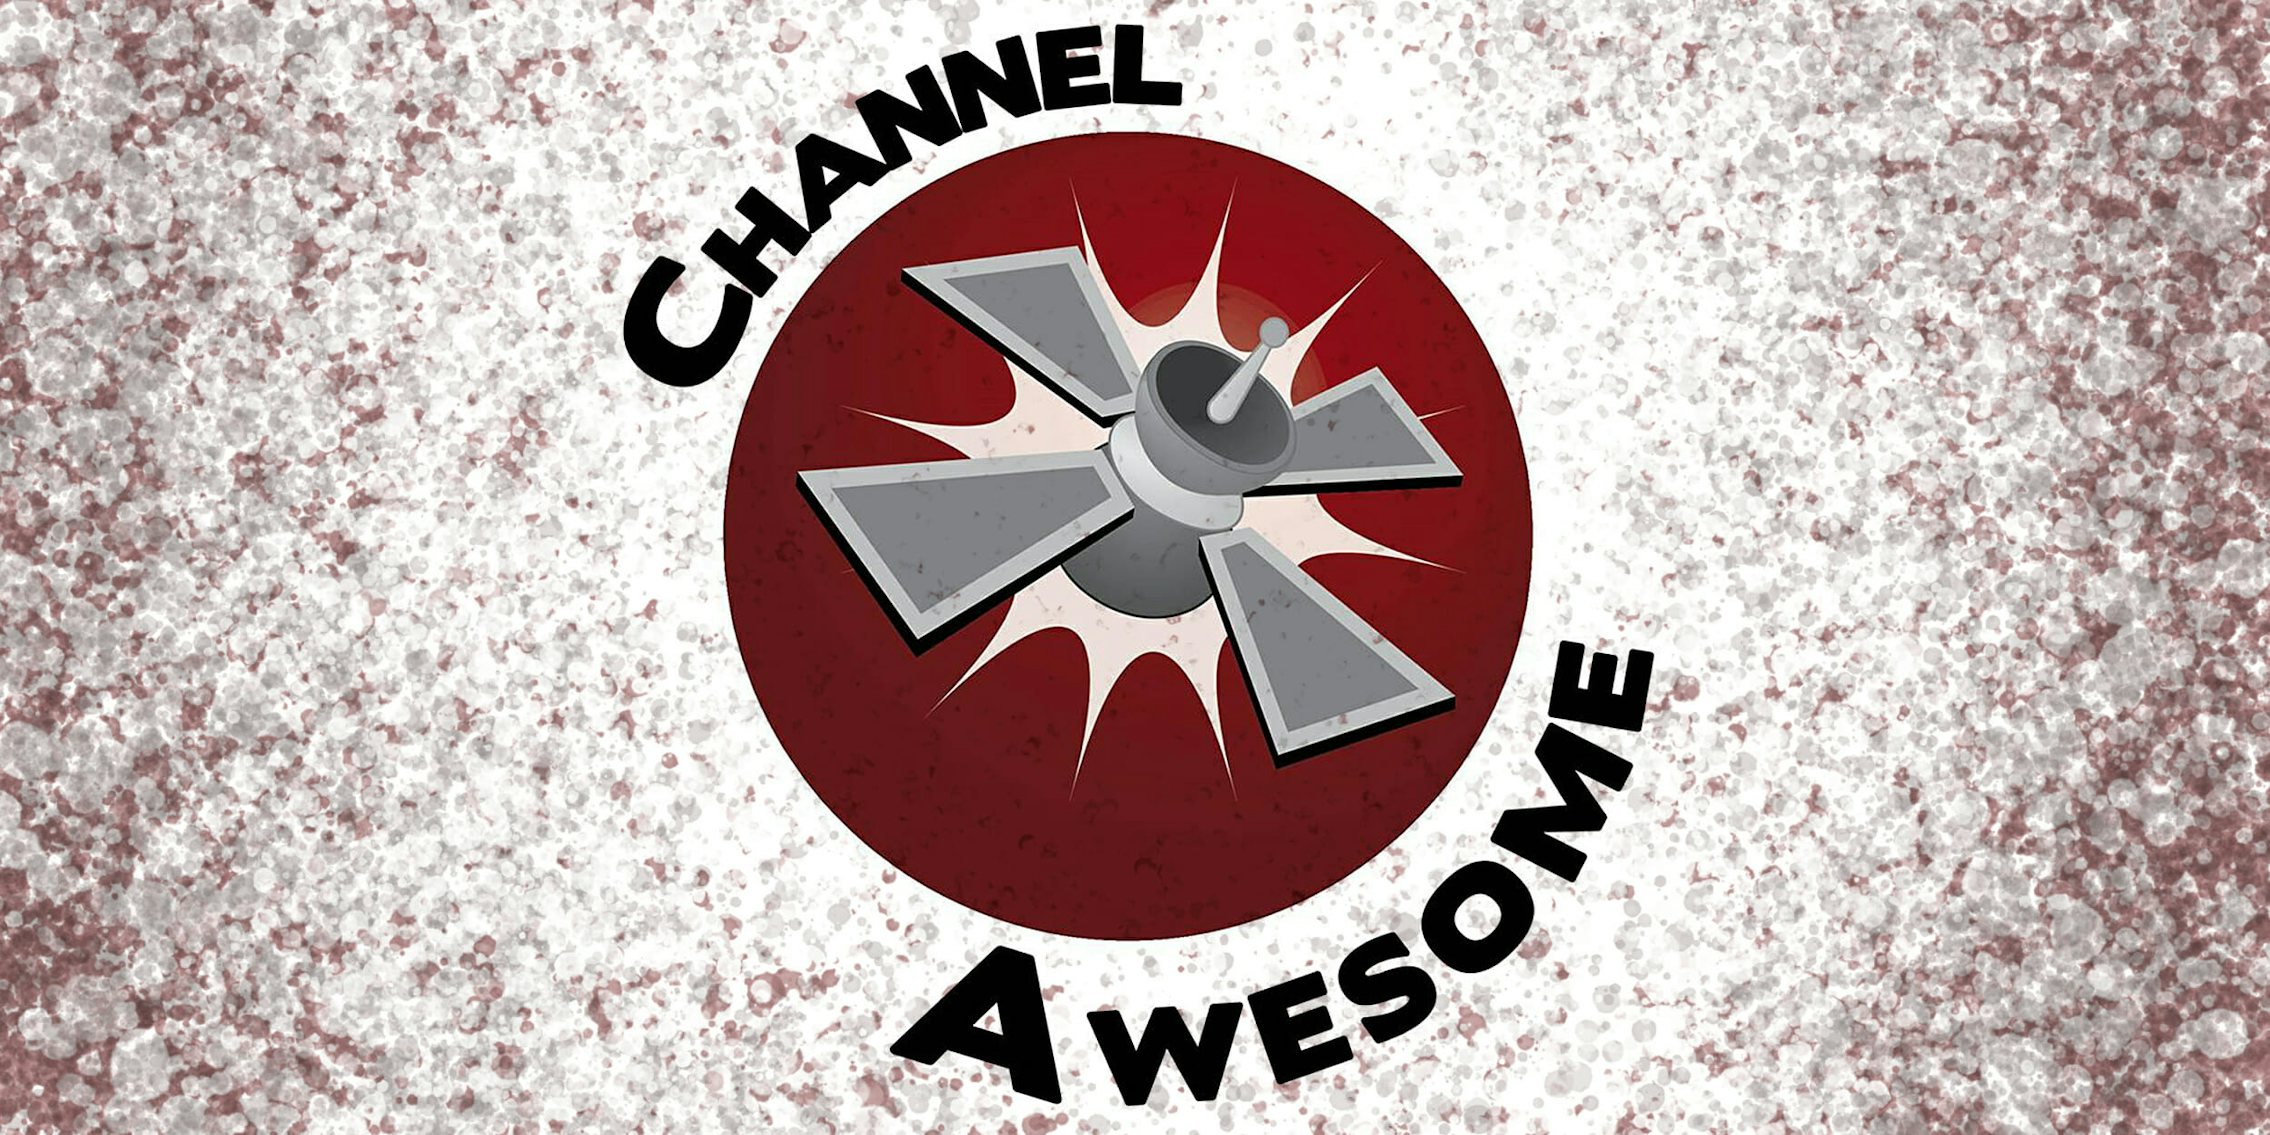 Channel Awesome logo